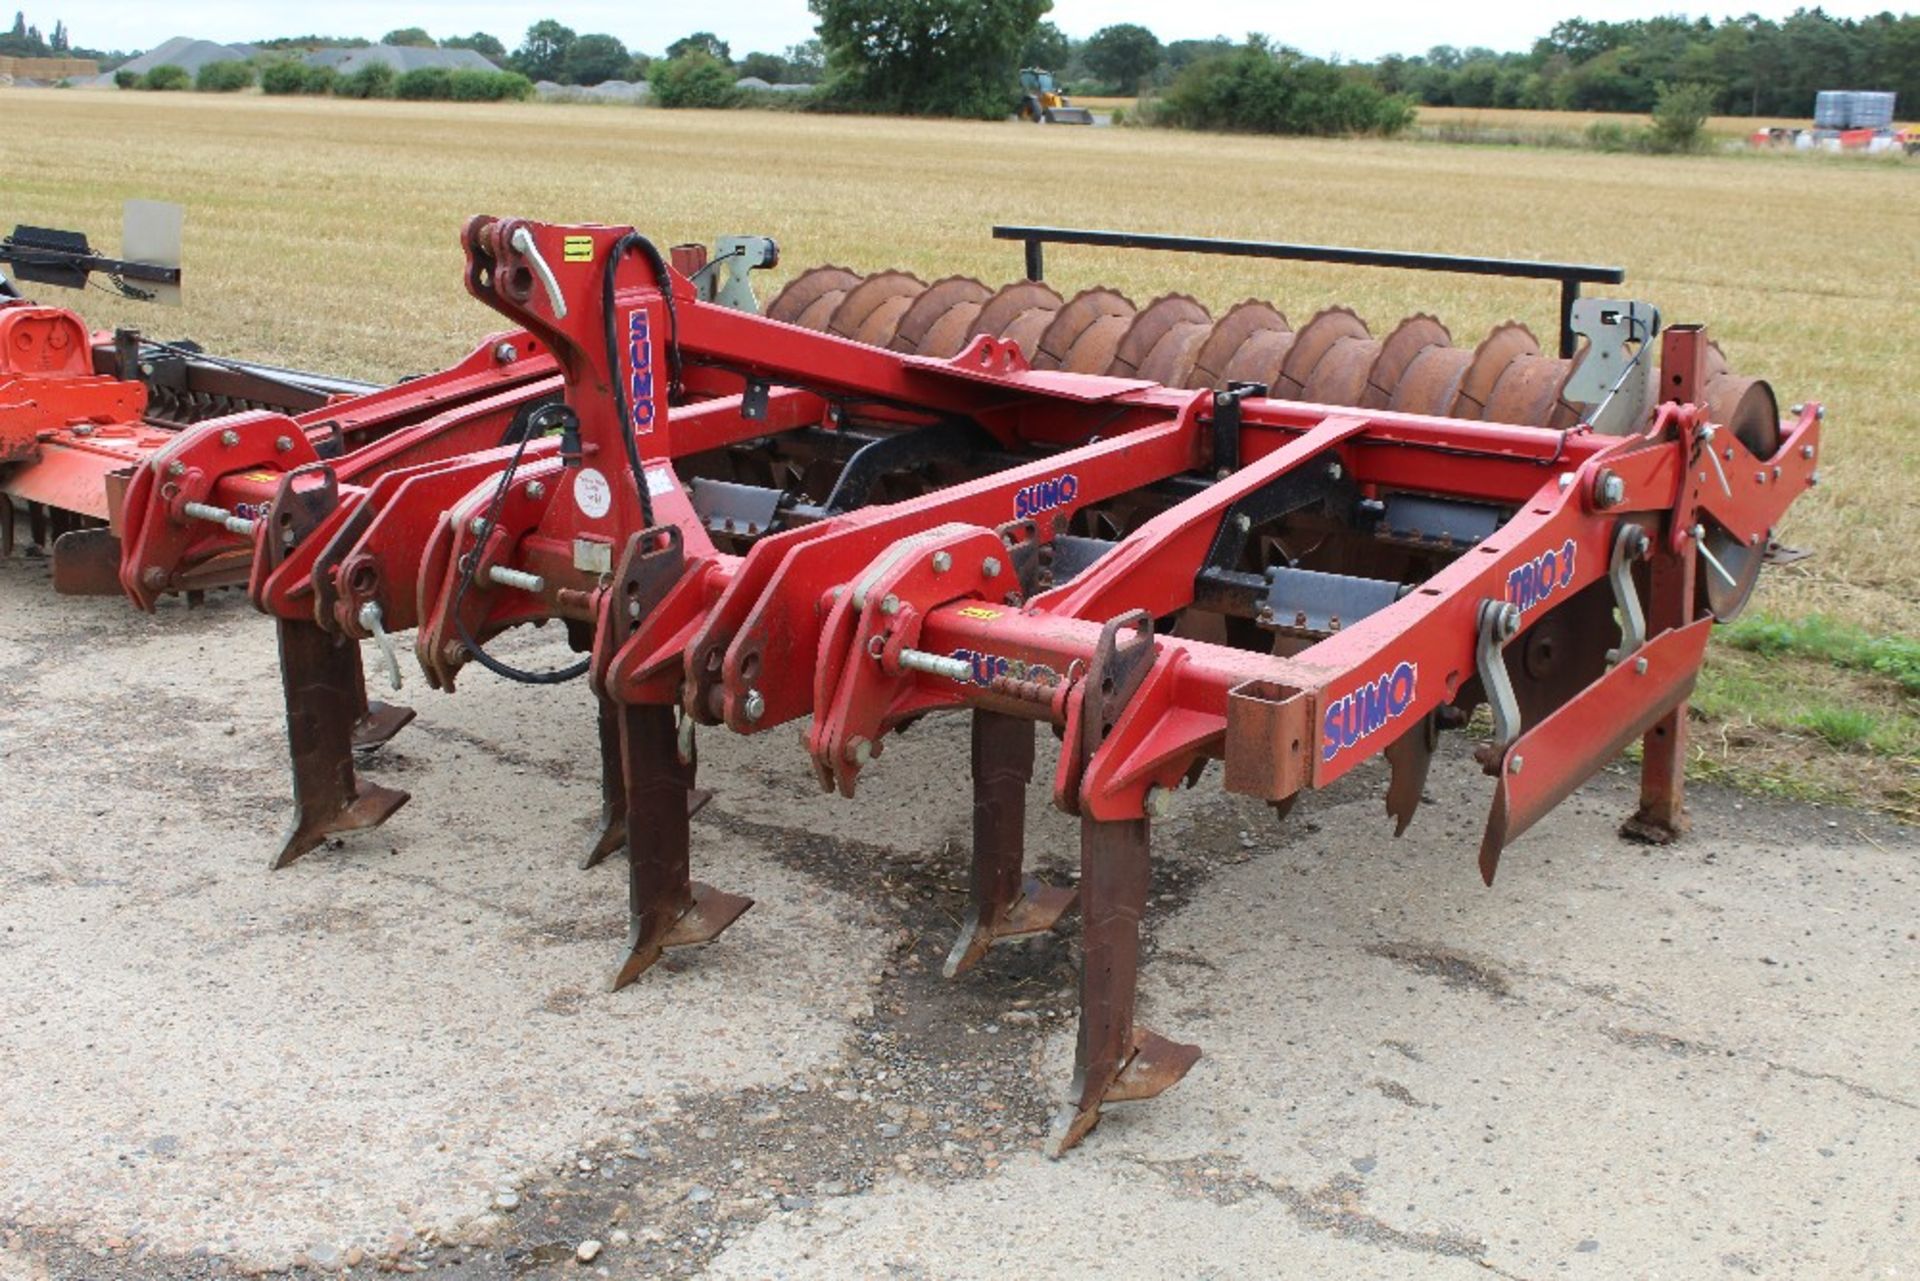 Sumo Trio 3 3m mounted cultivator 2012. Serial number 11626. With six Metcalfe low disturbance legs, - Image 21 of 21